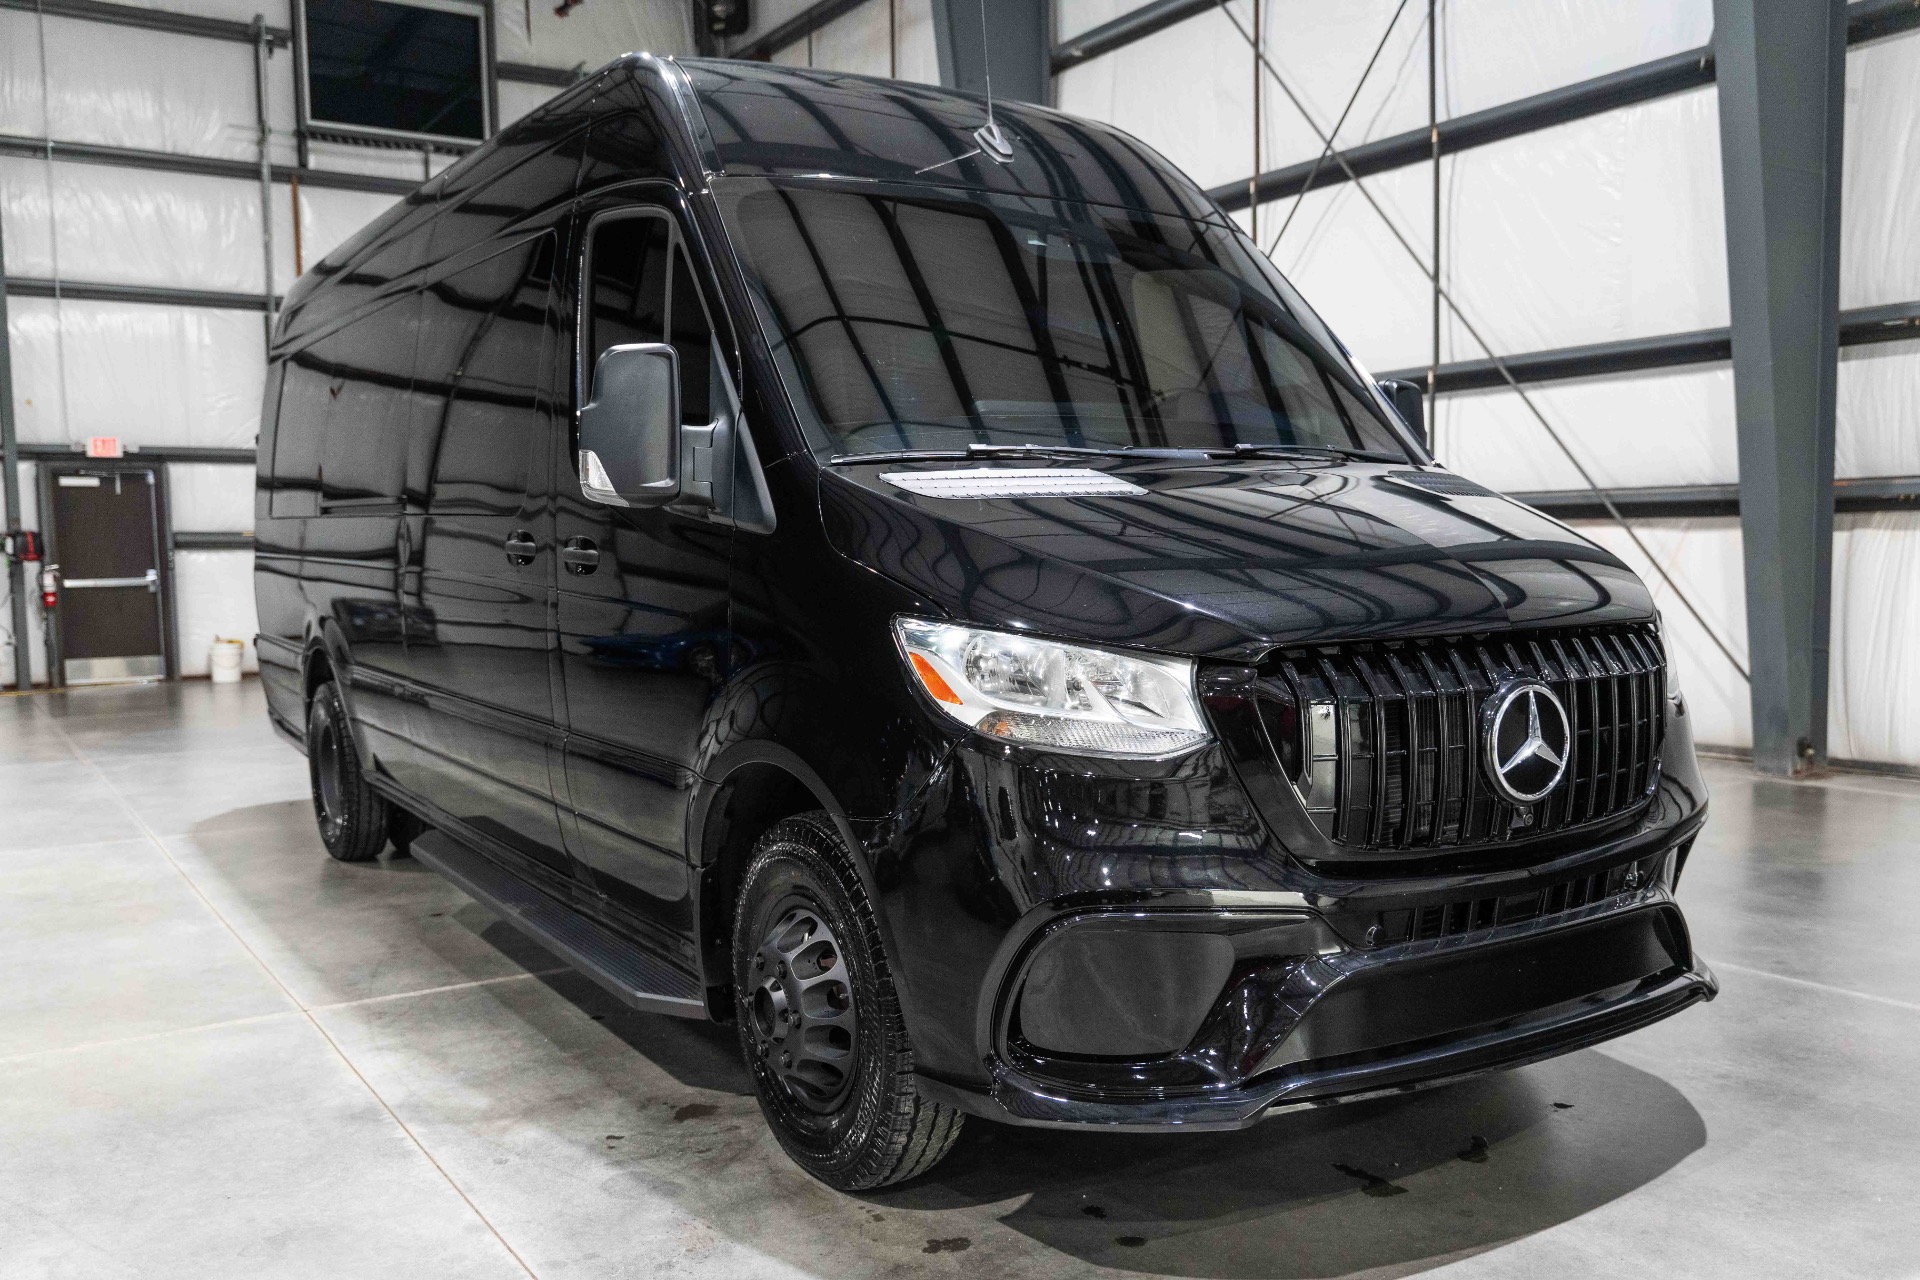 Used-2021-Mercedes-Benz-Sprinter-3500-Executive-Build-Low-Miles-Bathroom-TVDVDSatelliteWifi-Loaded